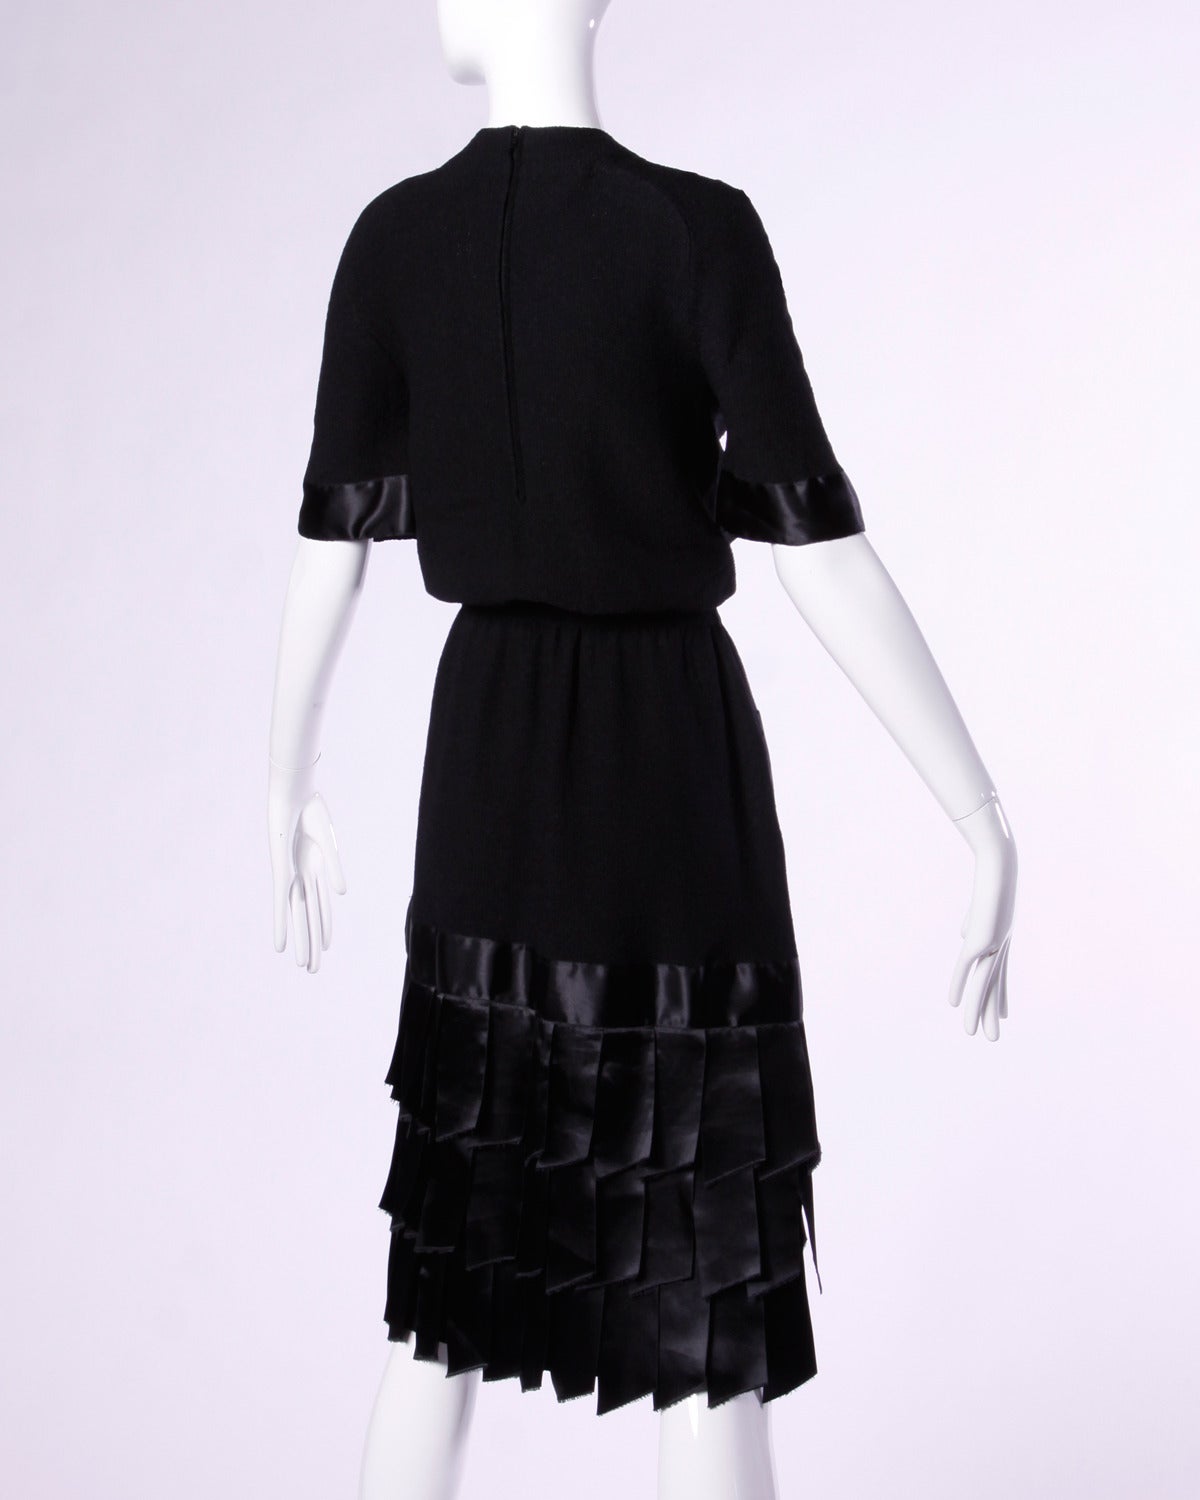 Vintage black knit dress with ribbon trim and fringe by Adolfo for I. Magnin. Gold buttons and short sleeves.

Details:

Unlined
Back Zip Closure
Estimated Size: Small- Medium
Color: Black
Fabric: Knit
Label: Adolfo for I.